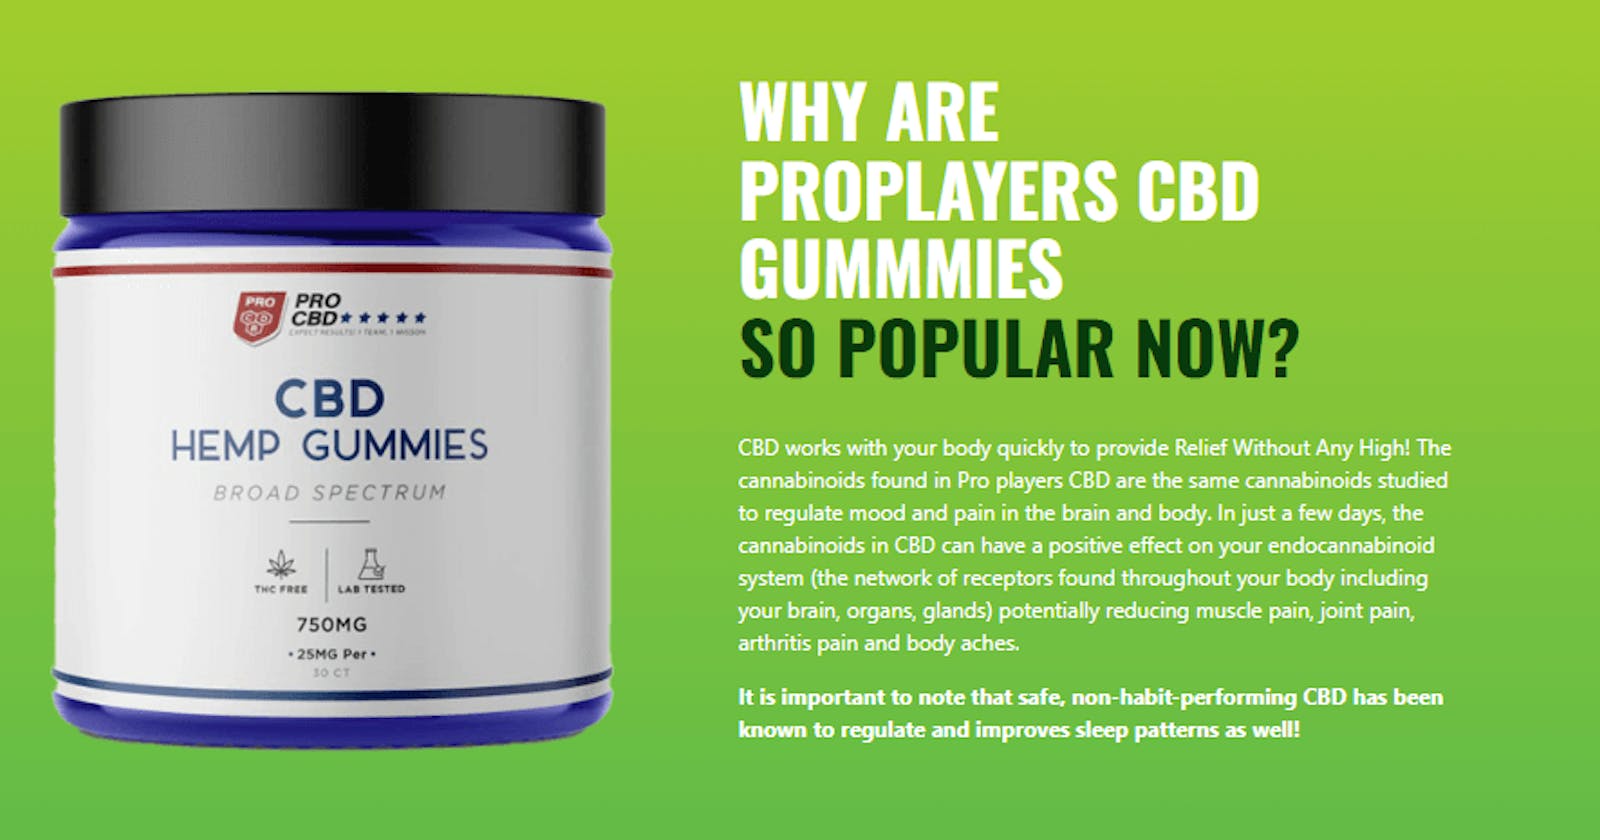 Revolutionize Your PRO CBD HEMP GUMMIES REVIEWS With These Easy-peasy Tips